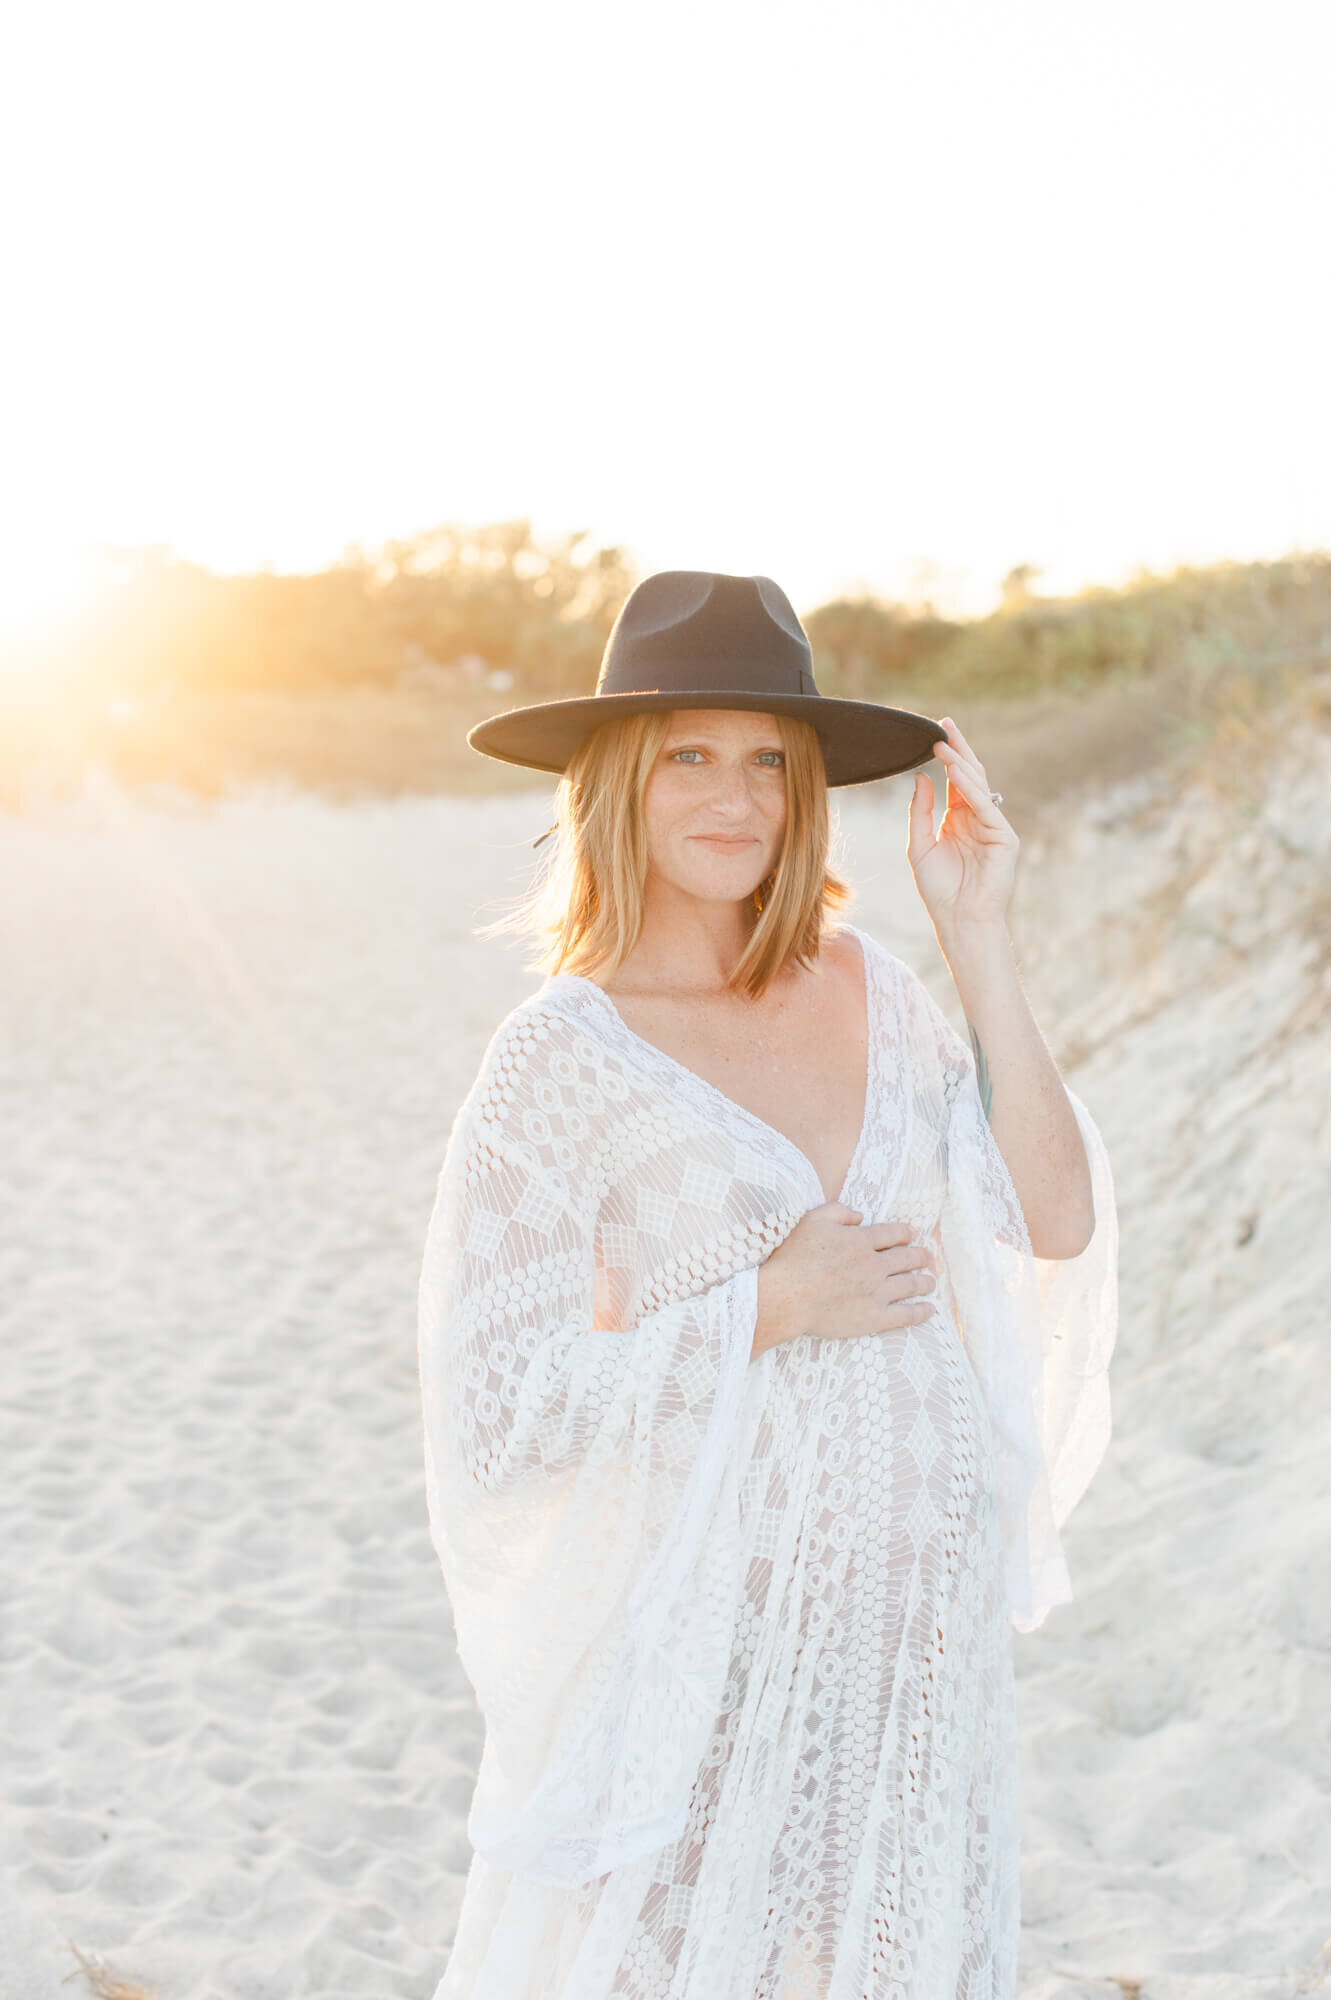 Stunning golden hour image captured on the beach at sunset of mom holding her belly with one hand and wide brim hat with the other